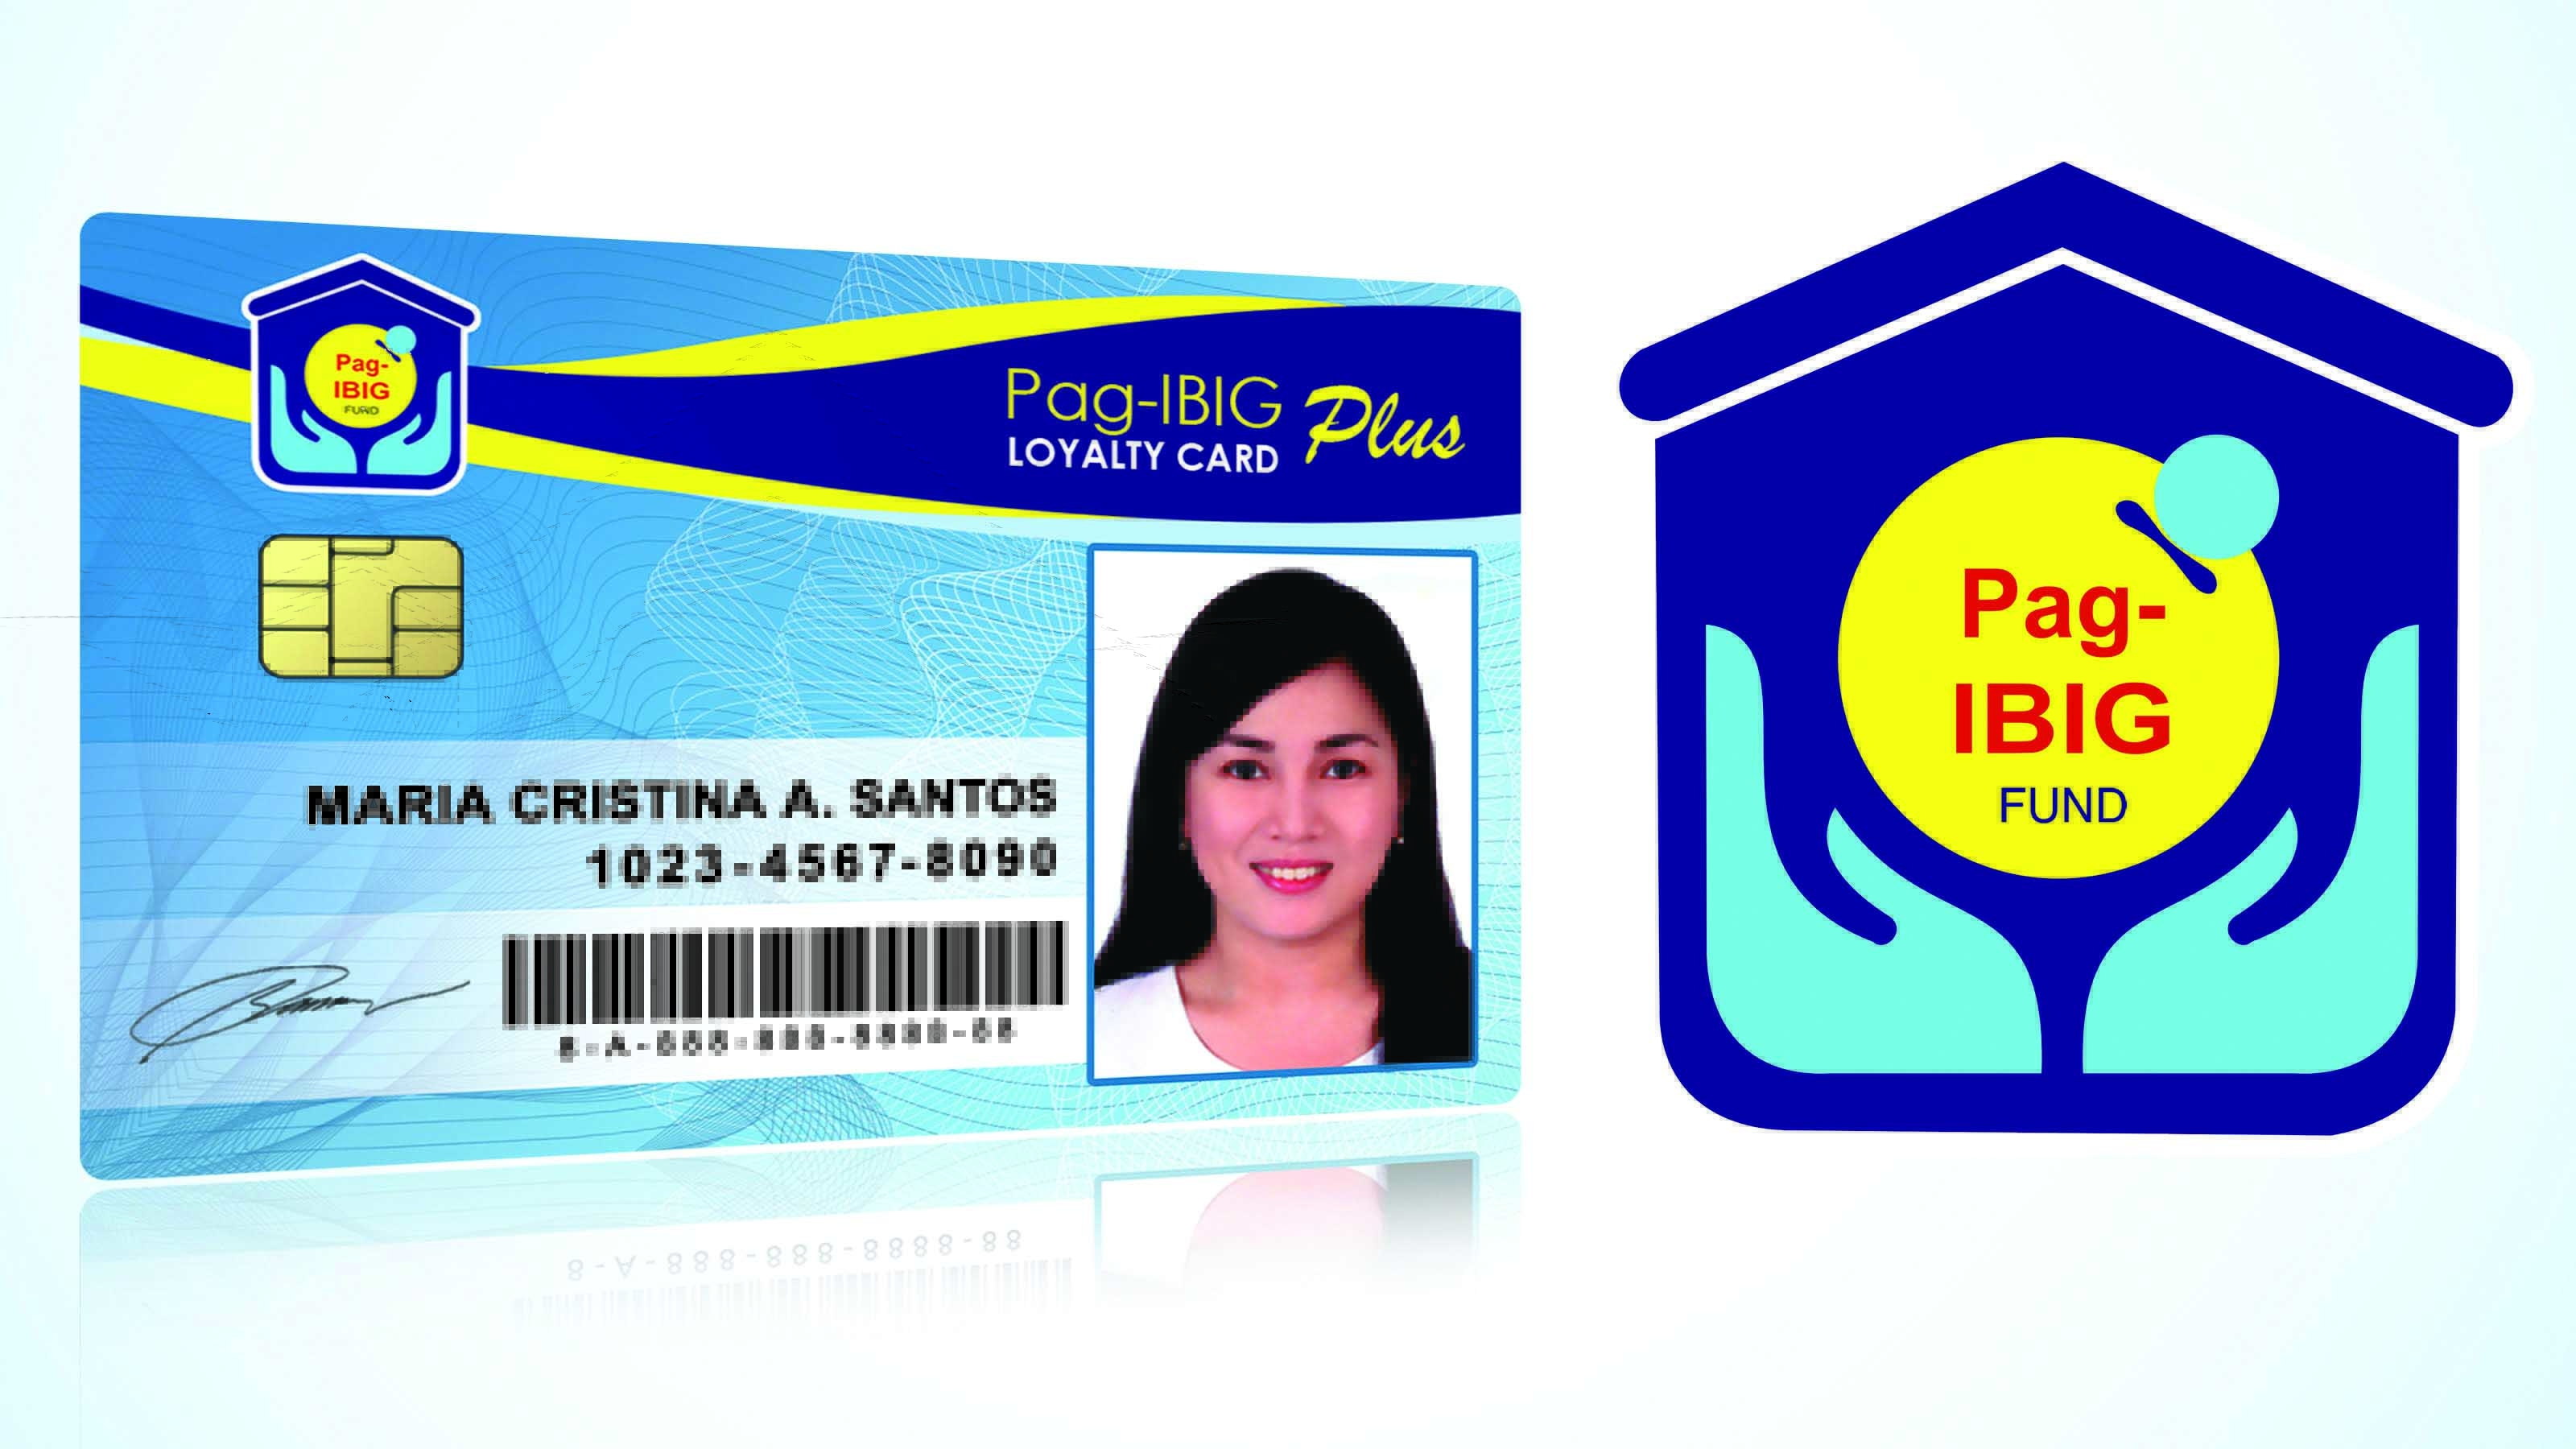 pag-ibig-fund-launches-improved-loyalty-card-plus